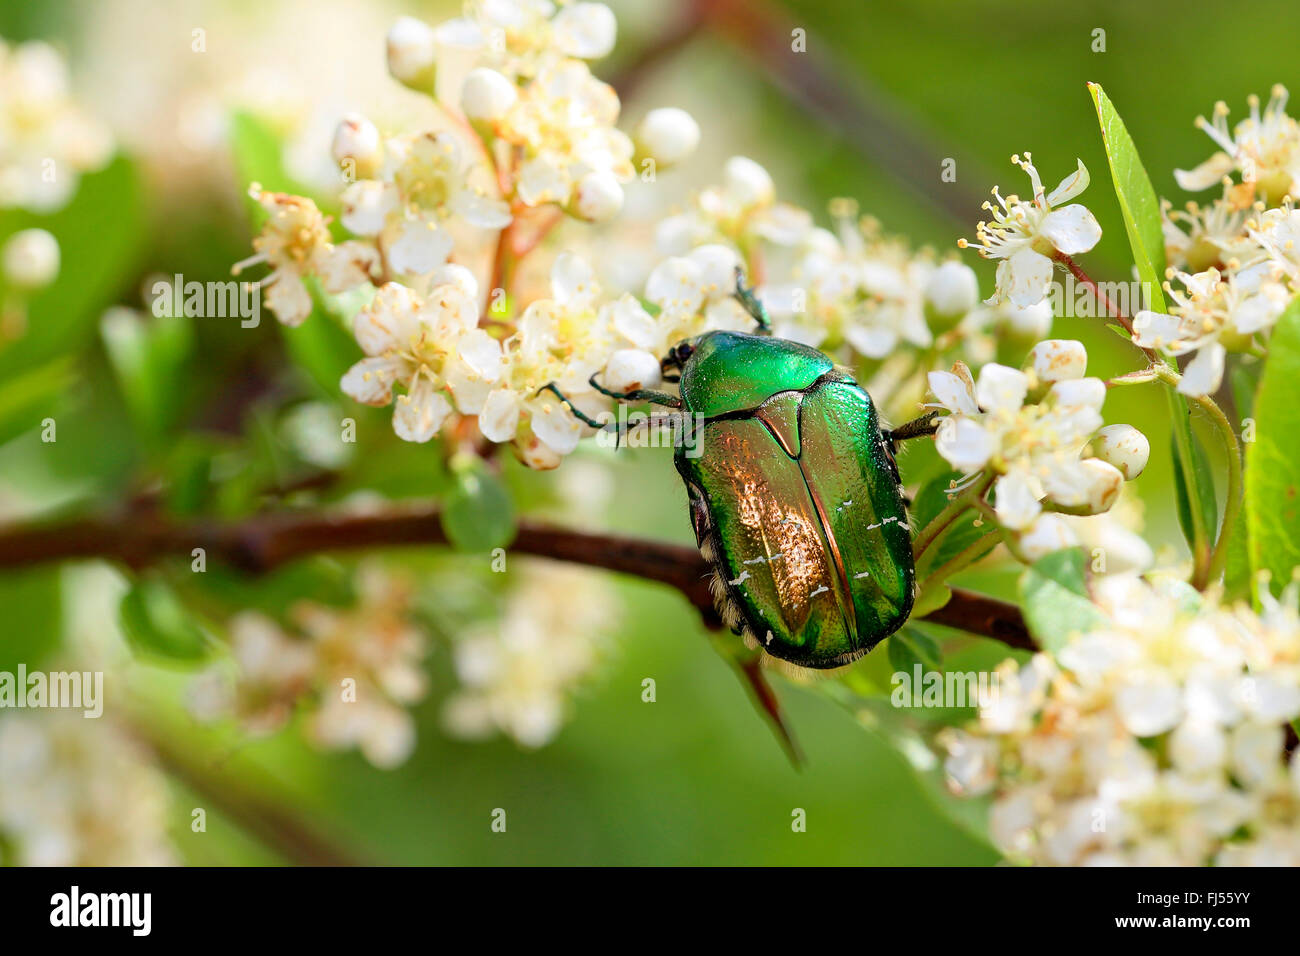 rose chafer (Cetonia aurata), sitting on a blooming twig, Greece, Kerkinisee Stock Photo